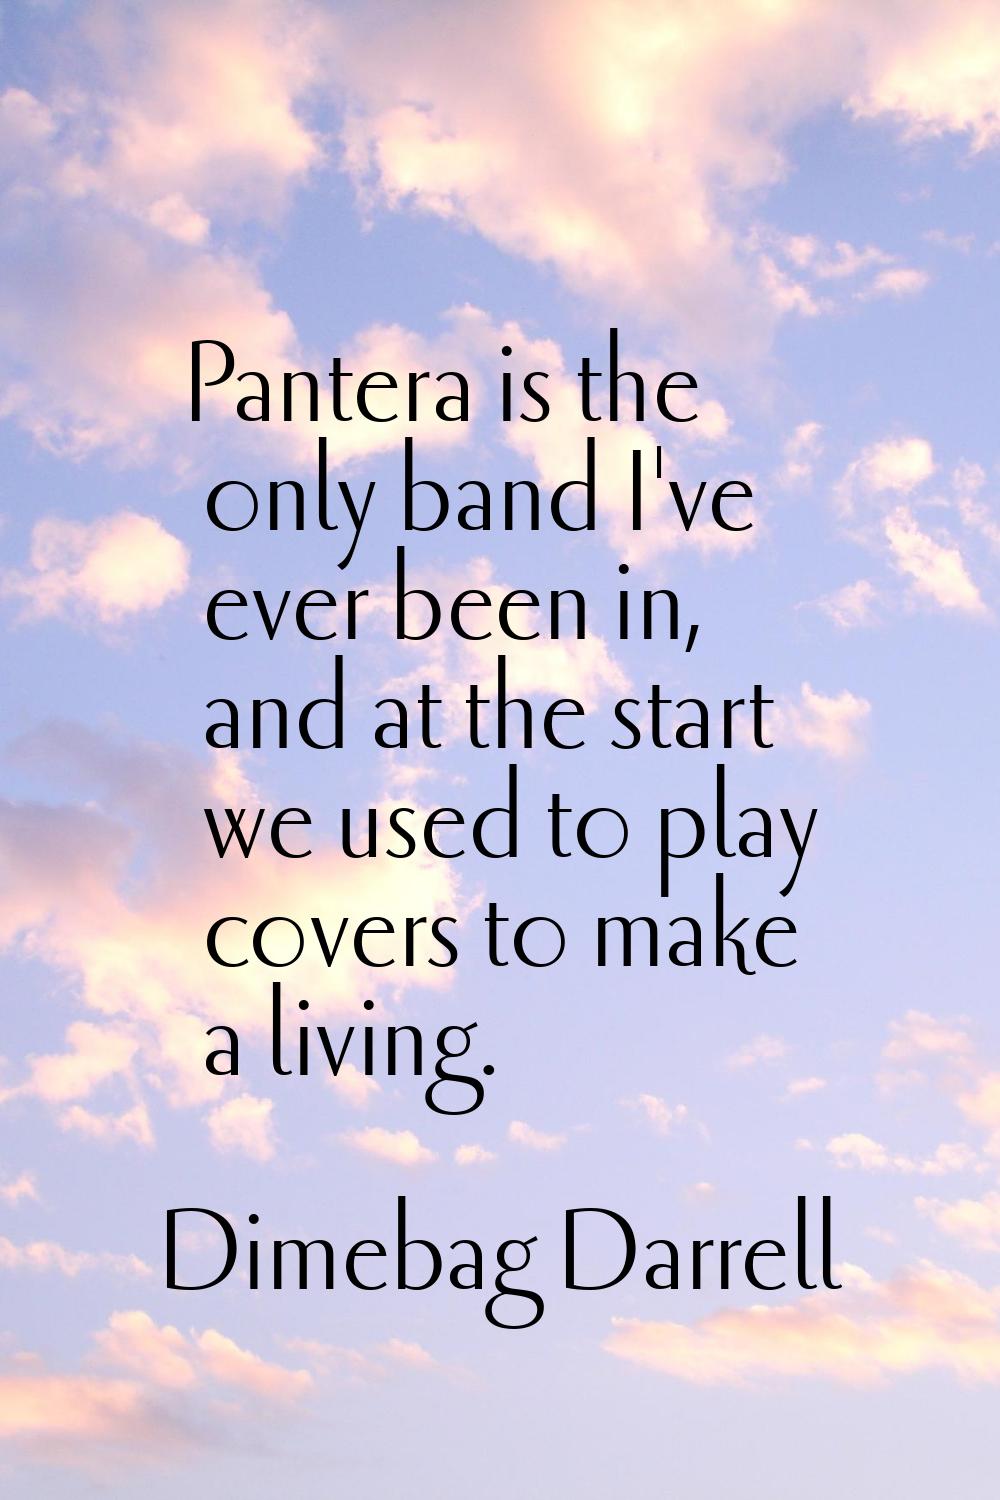 Pantera is the only band I've ever been in, and at the start we used to play covers to make a livin